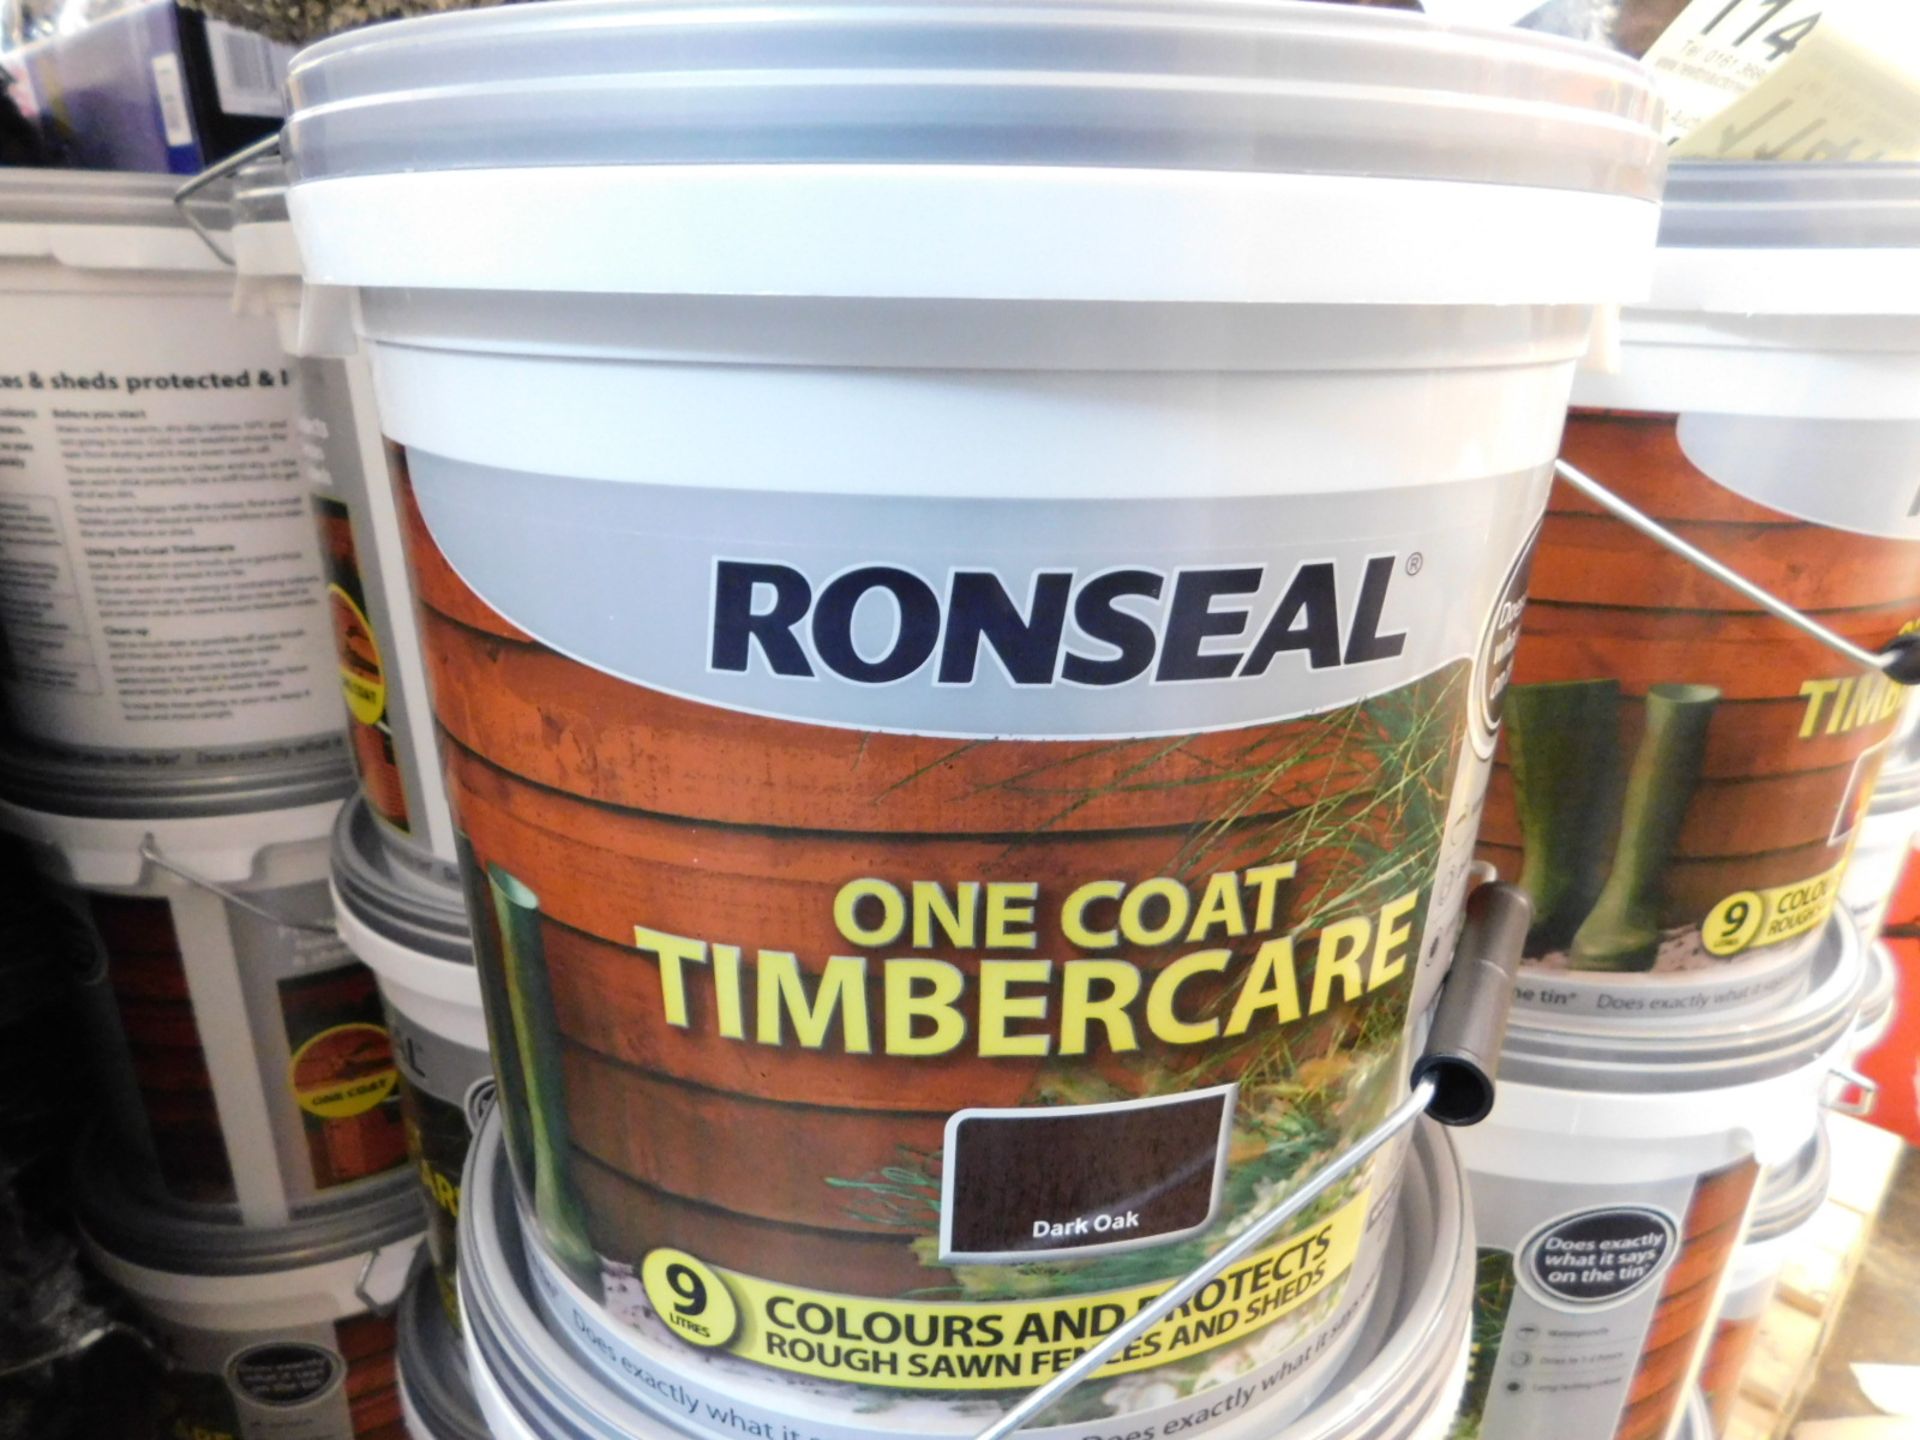 1 BRAND NEW TUB OF RONSEAL ONE COAT TIMBERCARE DARK OAK 9 LITRES RRP £12.99